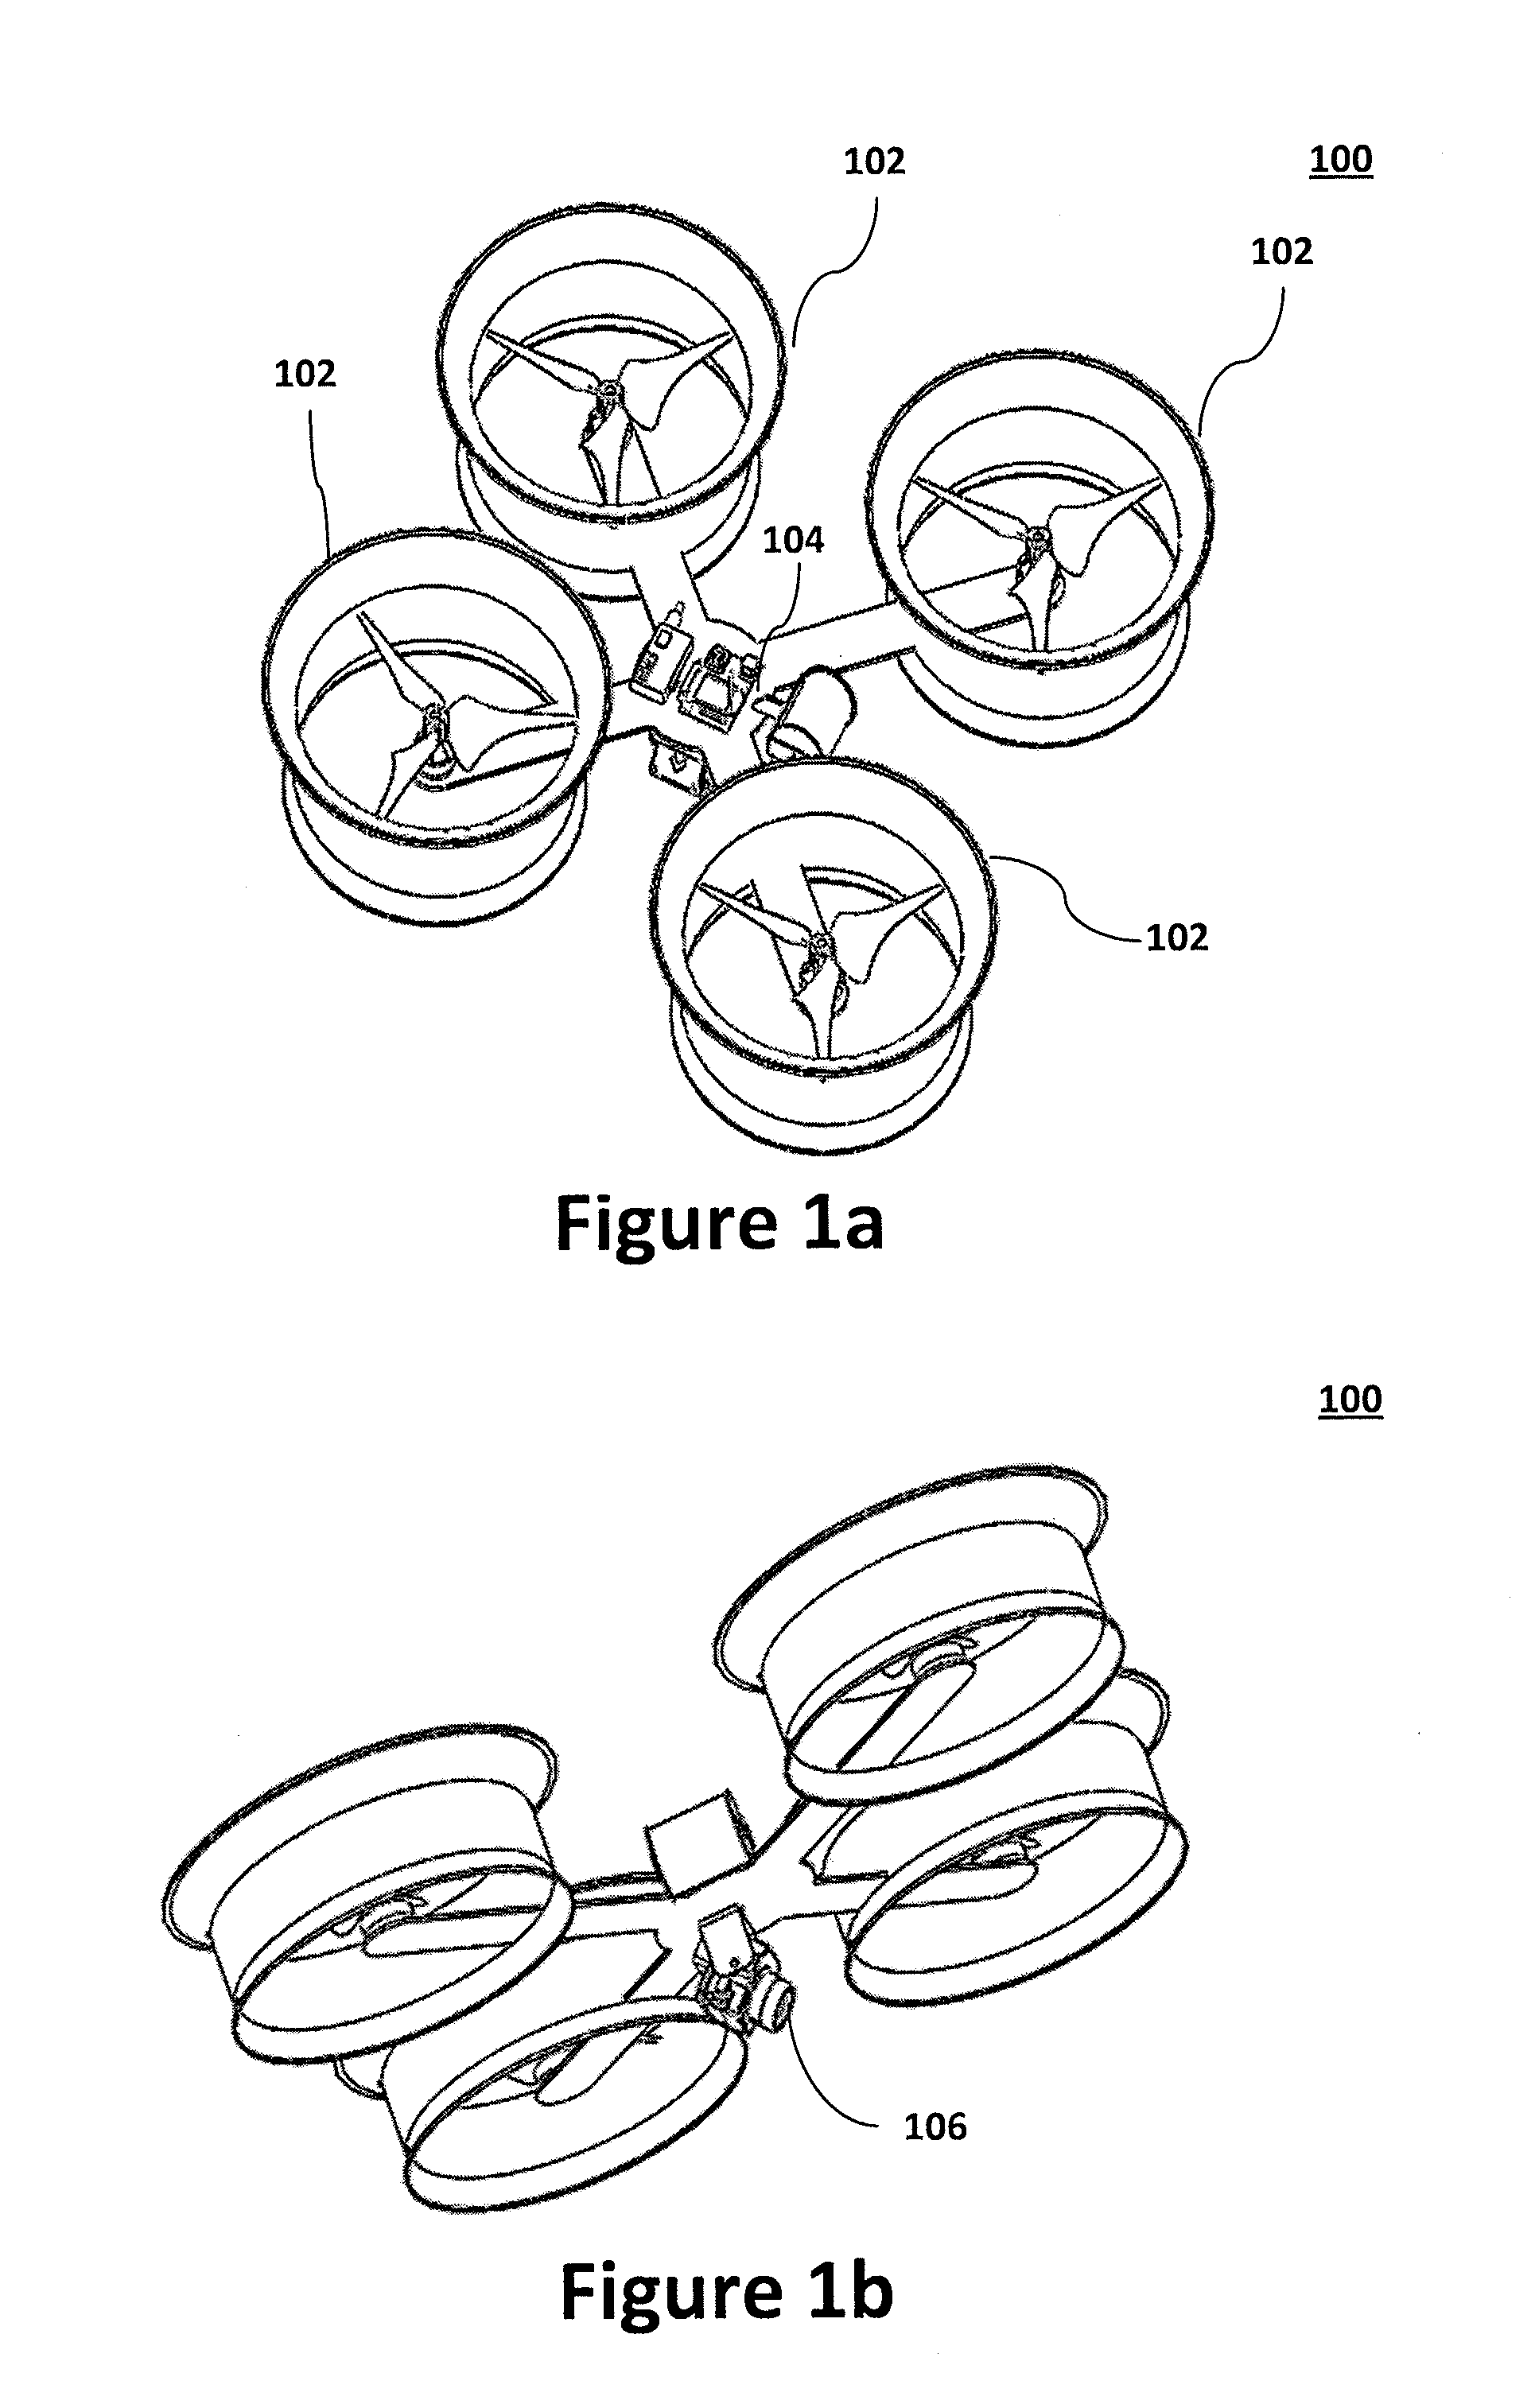 Tethered aerial system for data gathering